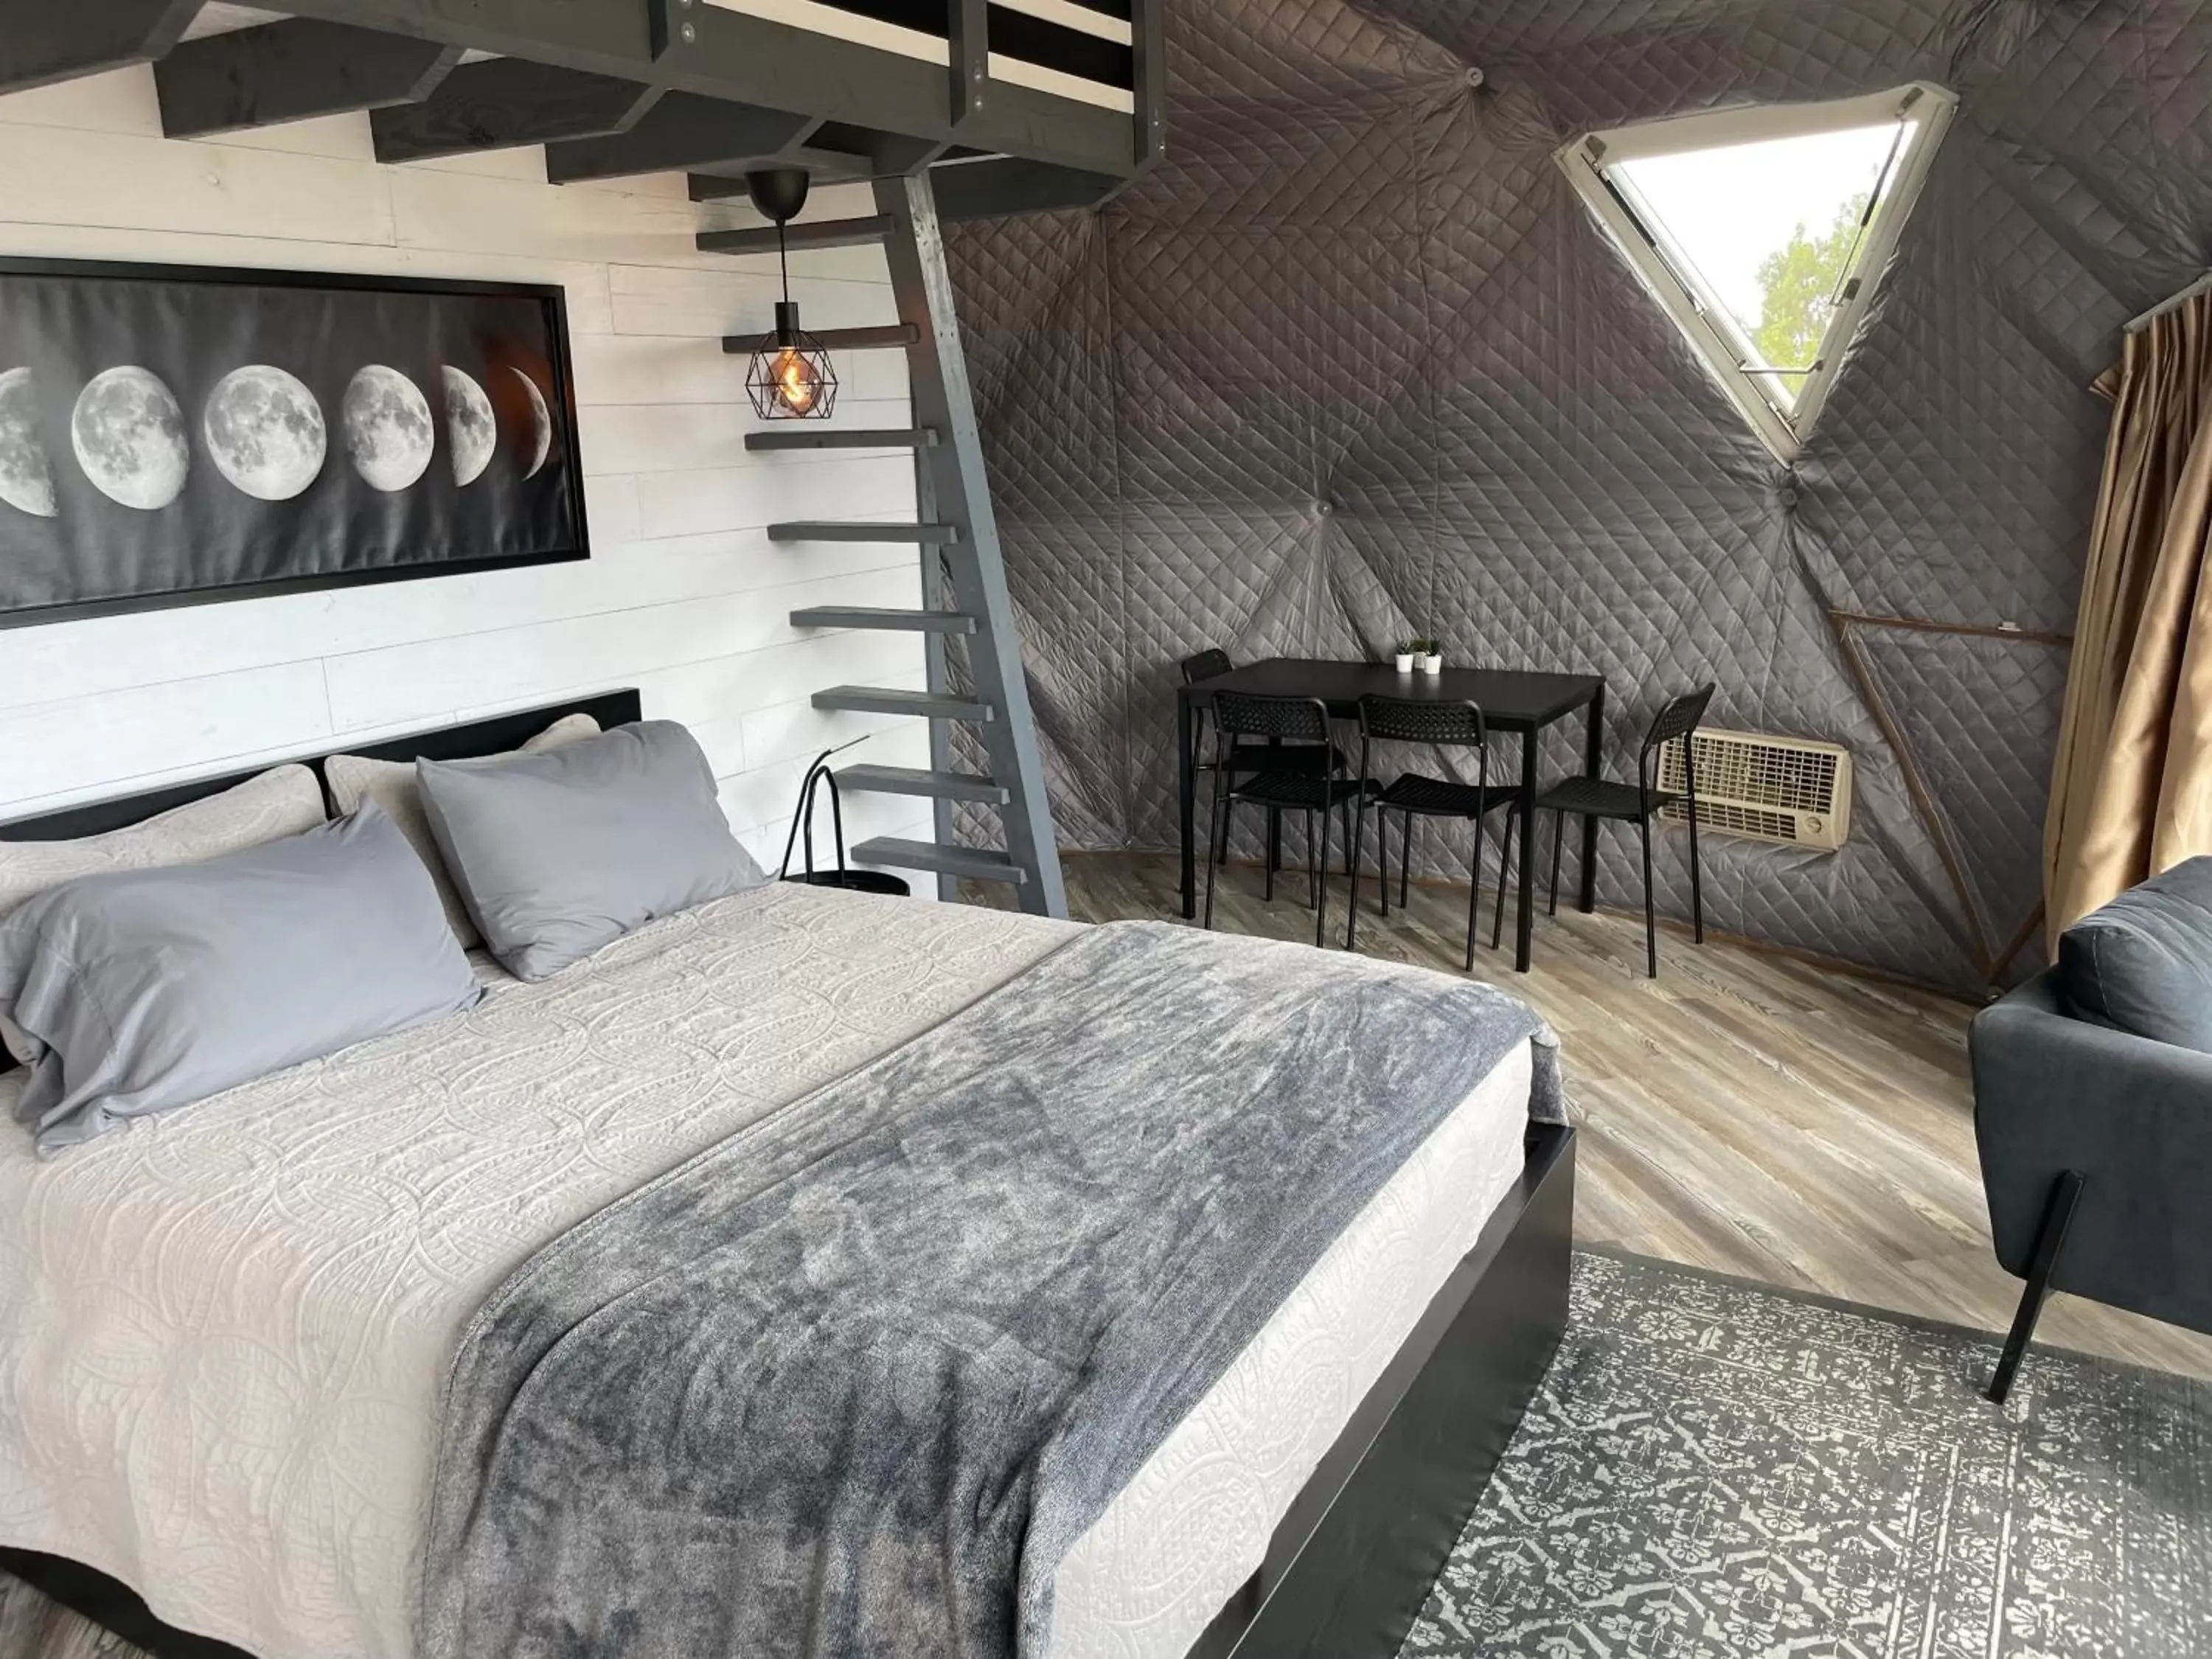 Deluxe Queen Suite in Canyon Rim Domes - A Luxury Glamping Experience!!